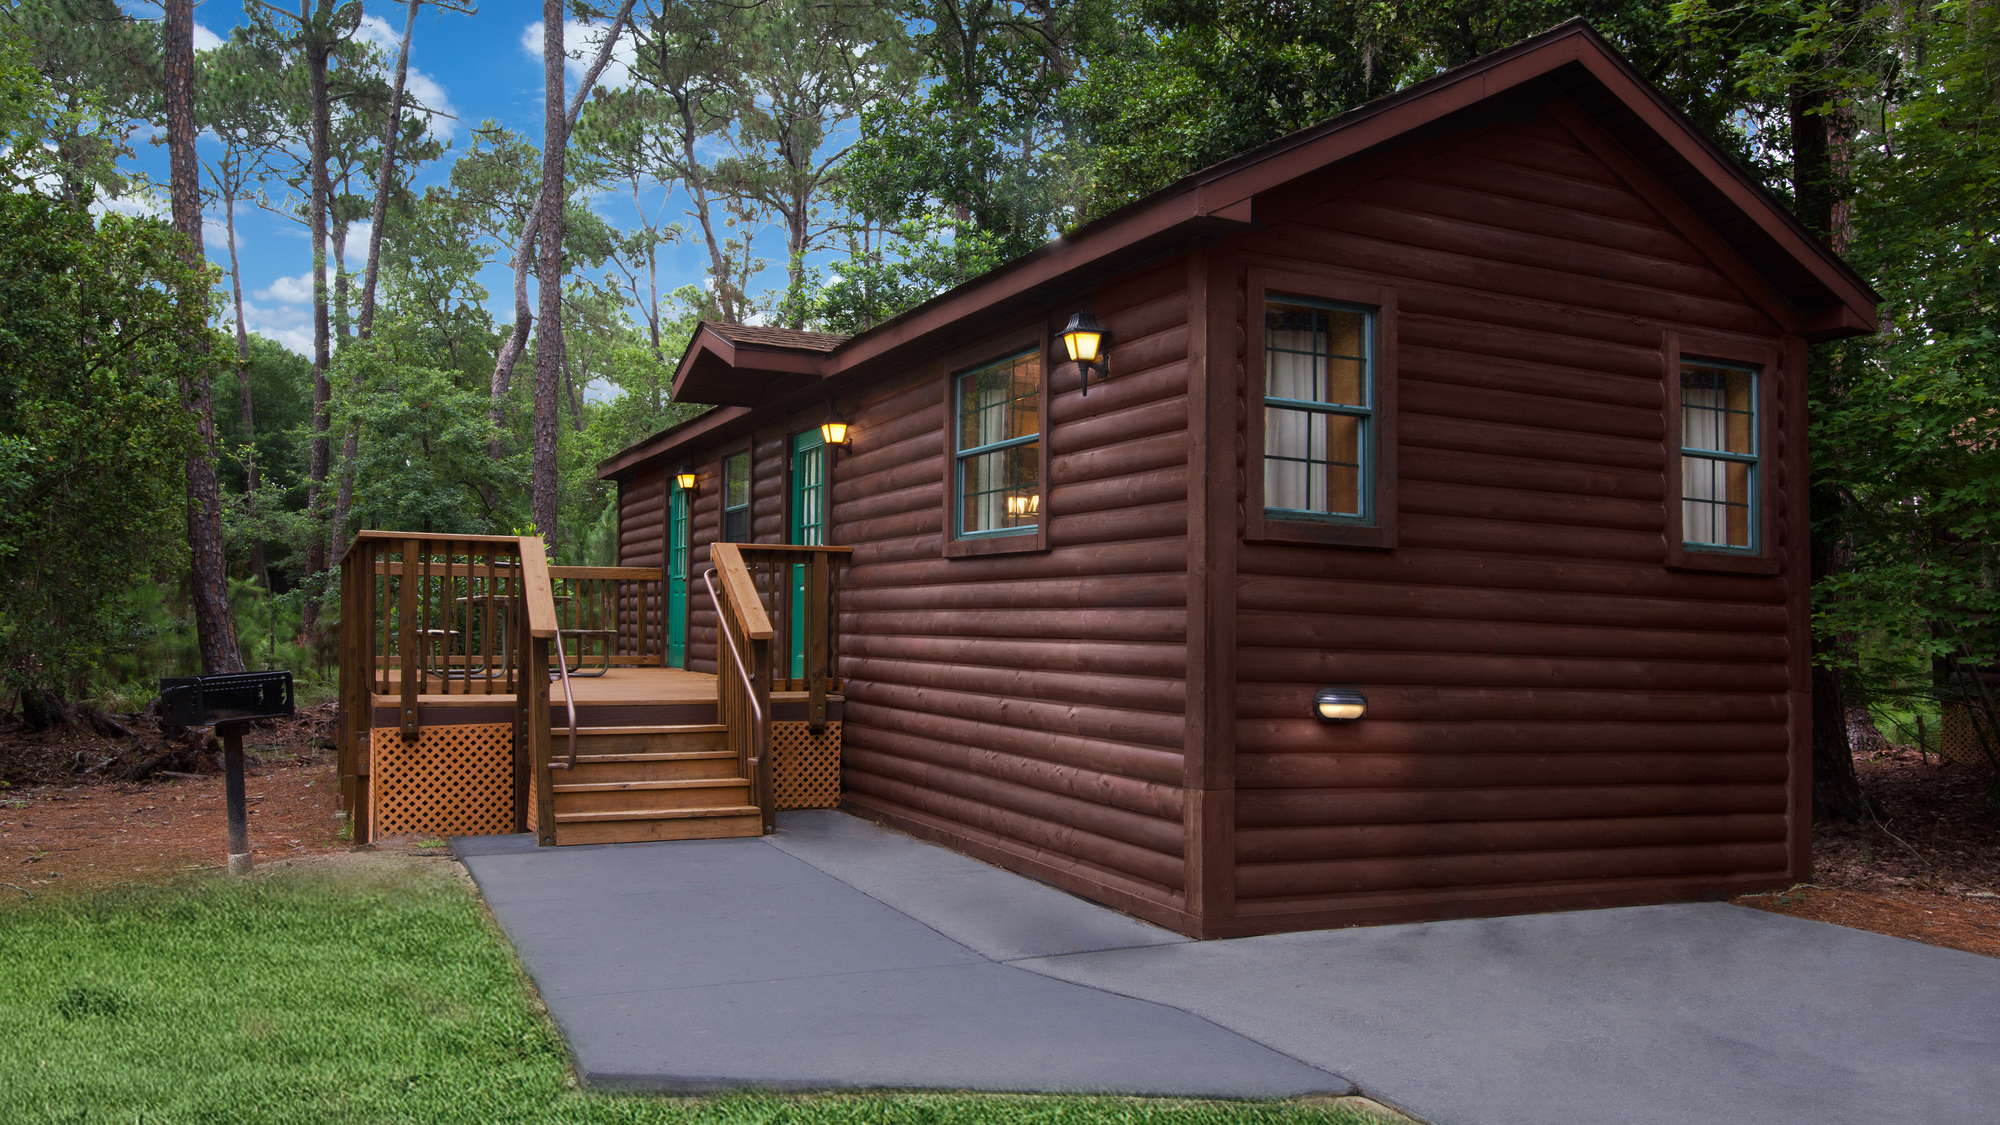 The Cabins At Disney S Fort Wilderness Resort Expert Review Fodor S Travel